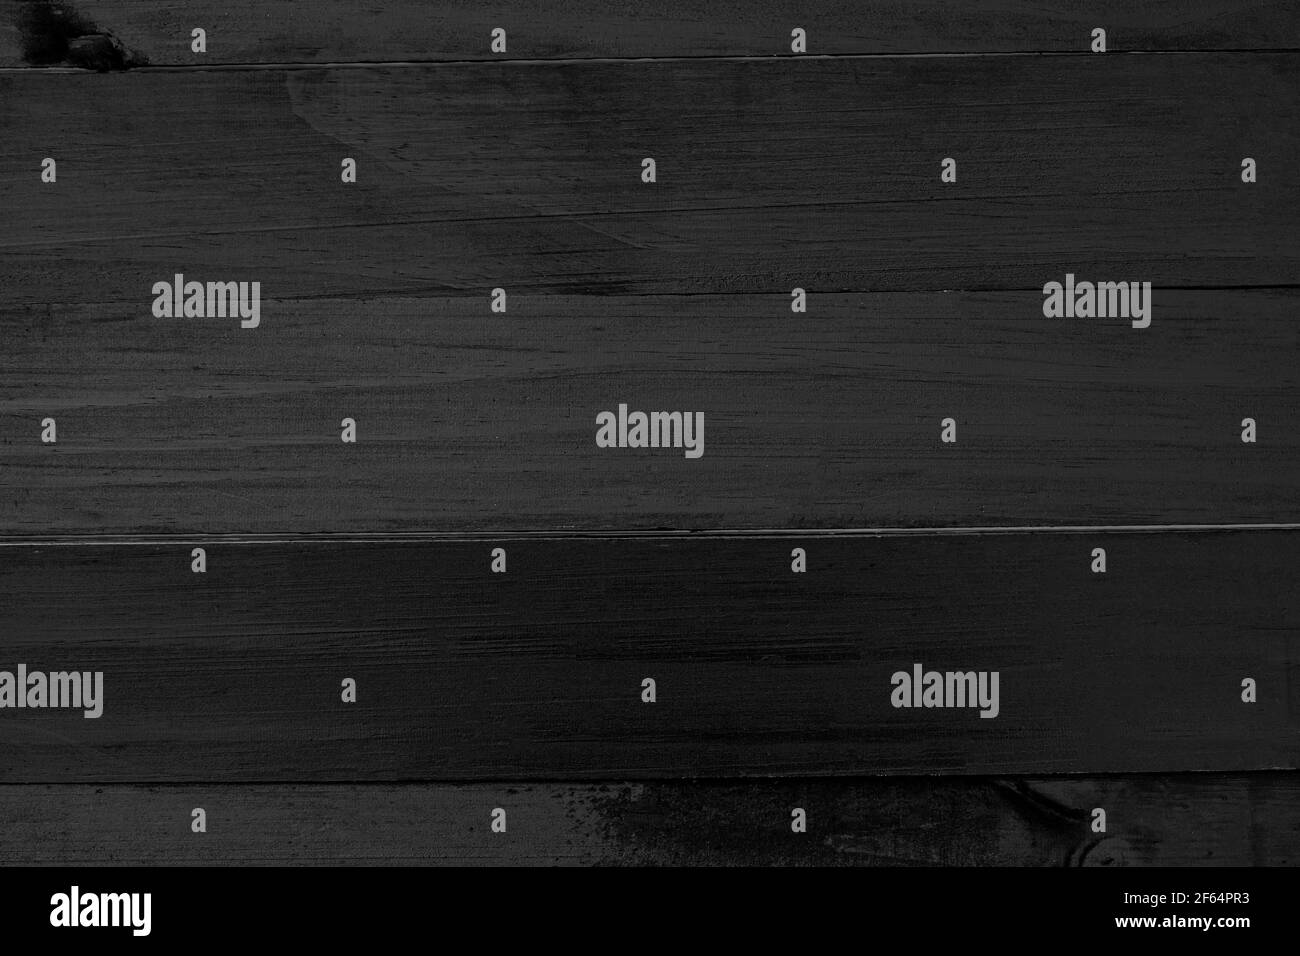 Antique pattern of Black wood texture background in design or add text to make the work look more better interesting. Blank with fantastic copy space, Stock Photo